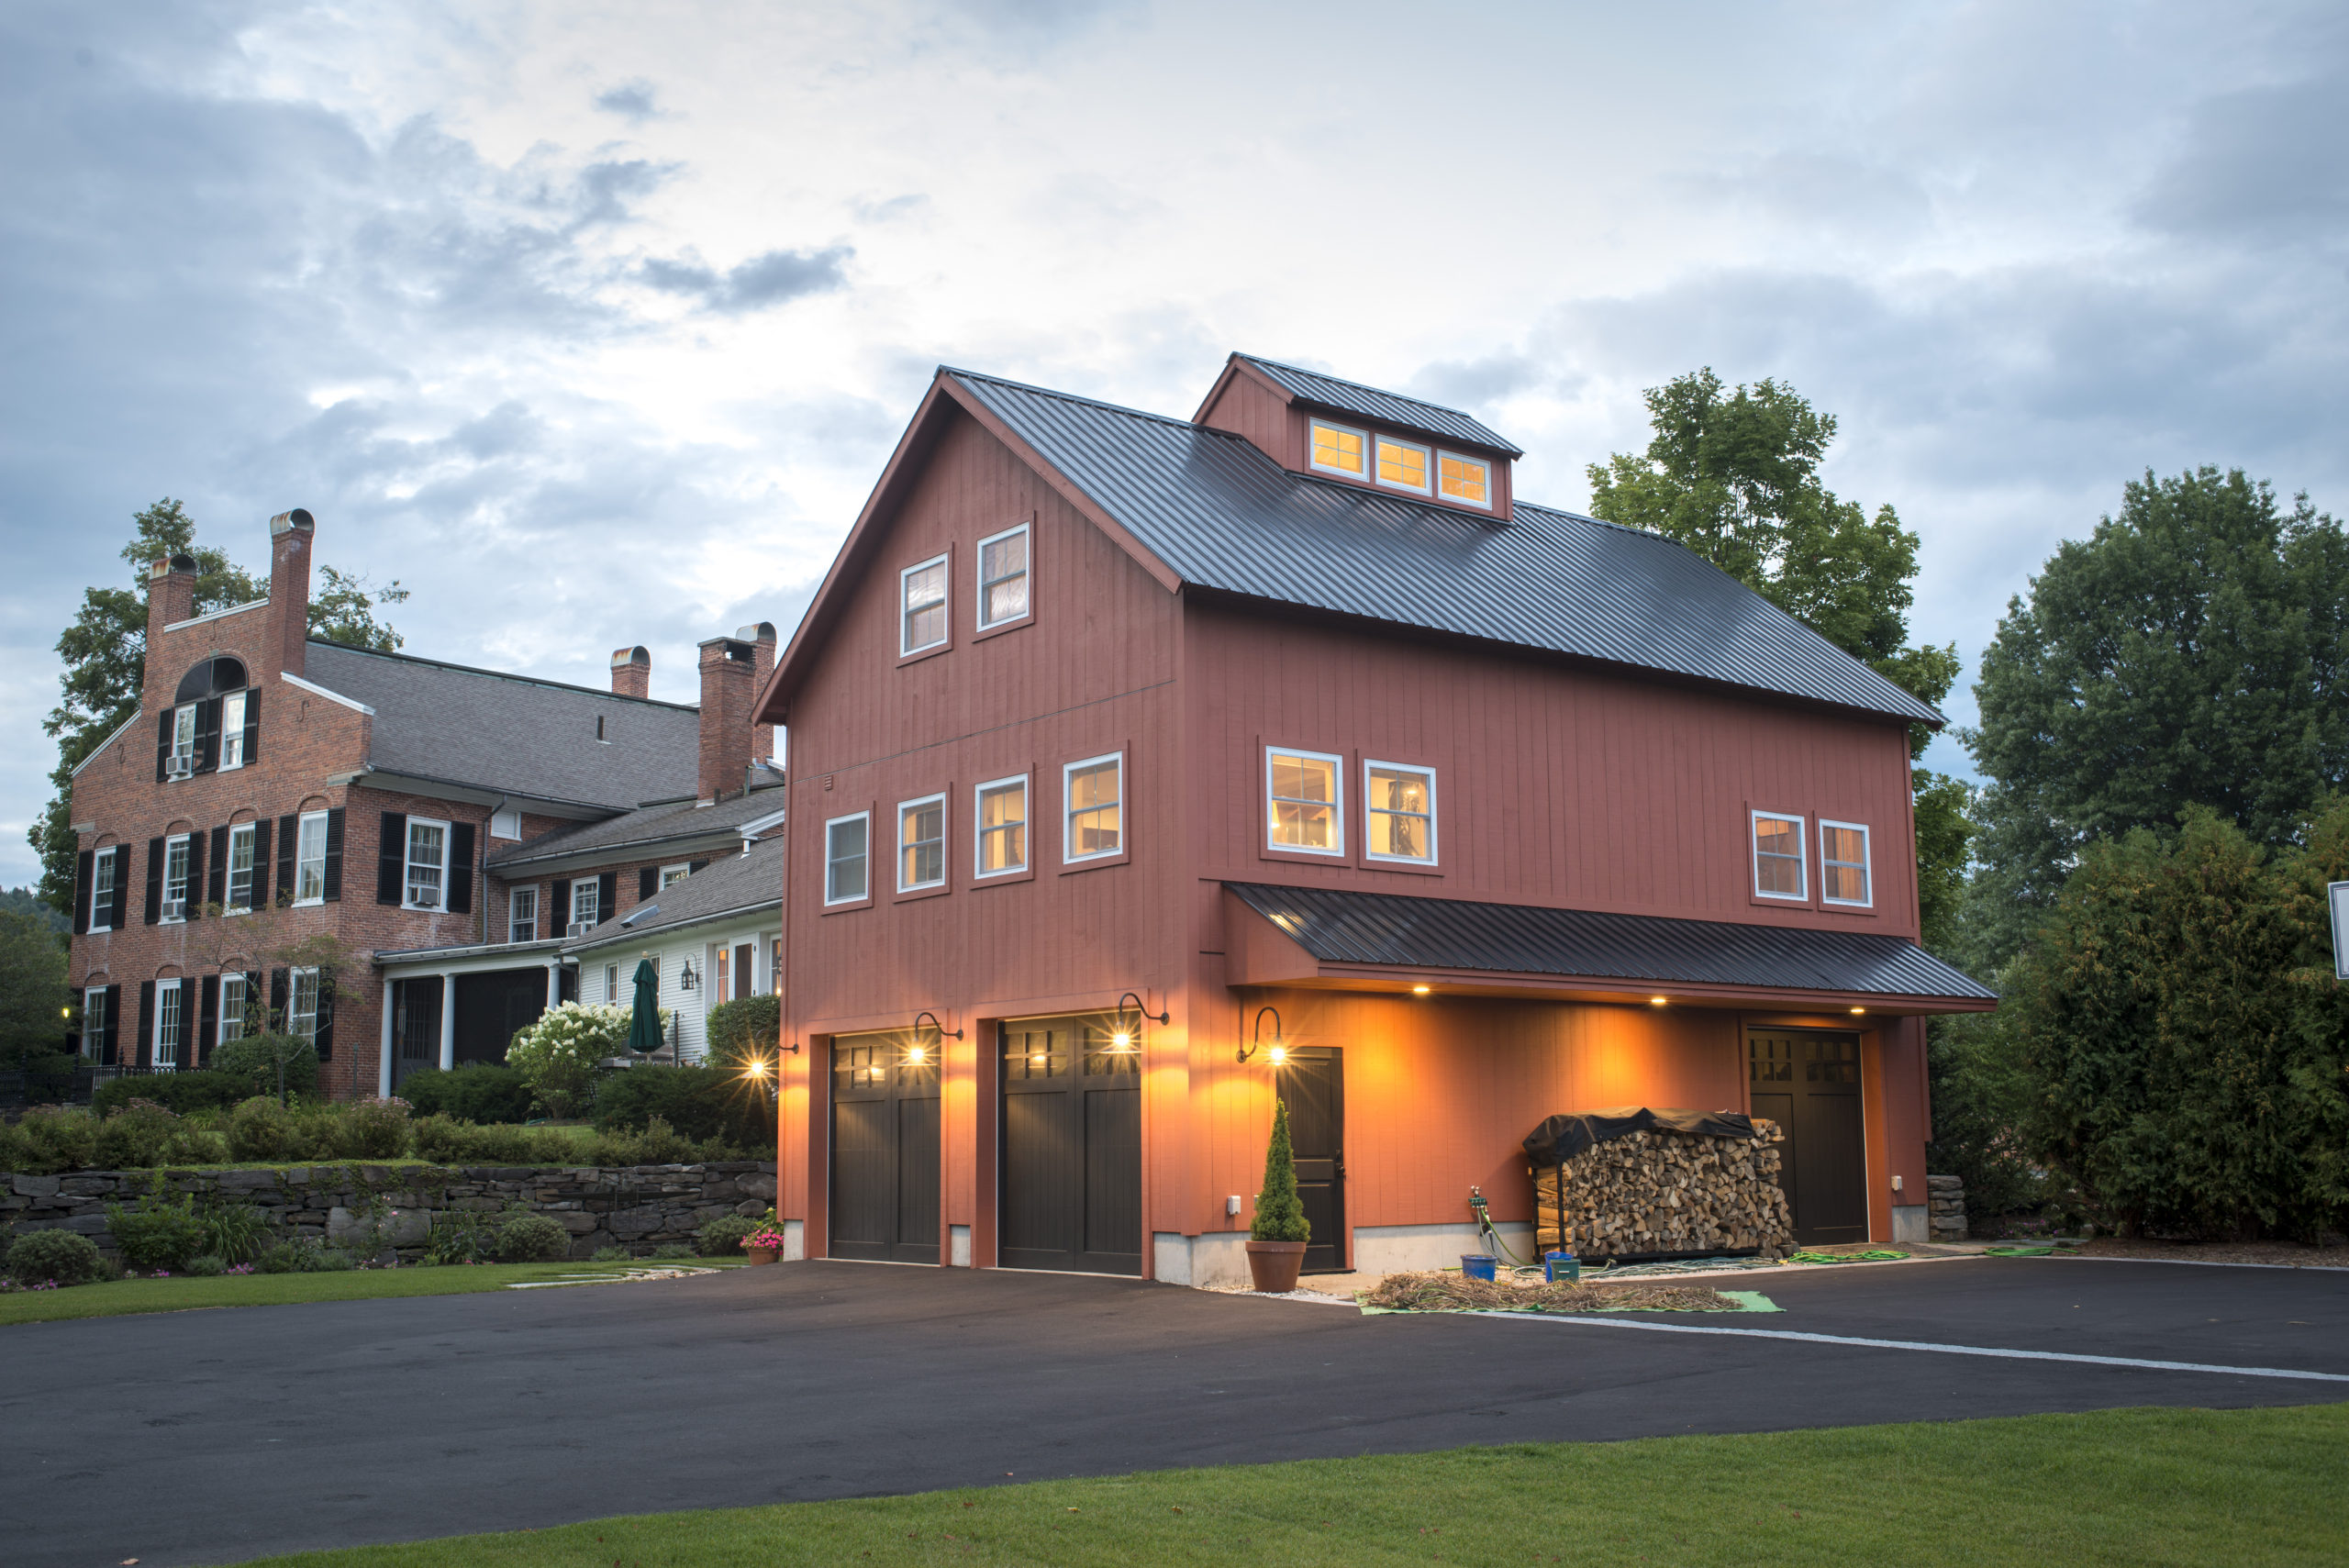 Historic Carriage House addition designed and built by Geobarns in an historic district, with barn red wood siding, black metal roof, and space for garage, recreation, and home office.